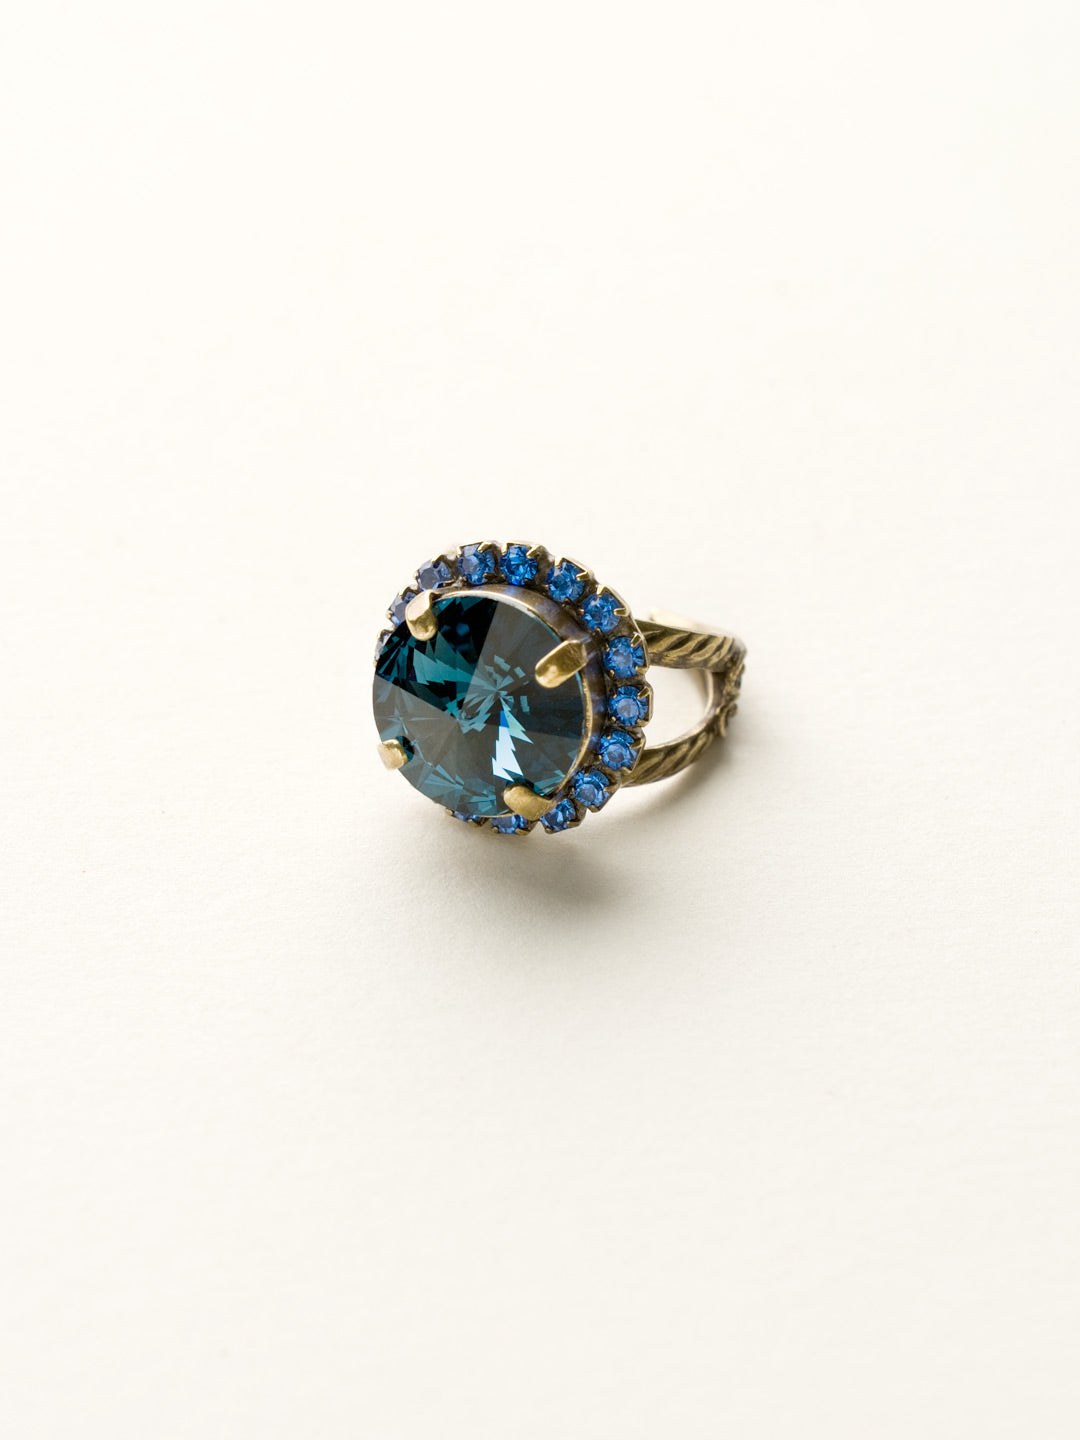 Round Cut Cocktail Ring - RCR60AGDBL - <p>Antique inspired and perfect for everyday! Wear this ring for a little extra sparkle on your digits! From Sorrelli's Dress Blues collection in our Antique Gold-tone finish.</p>